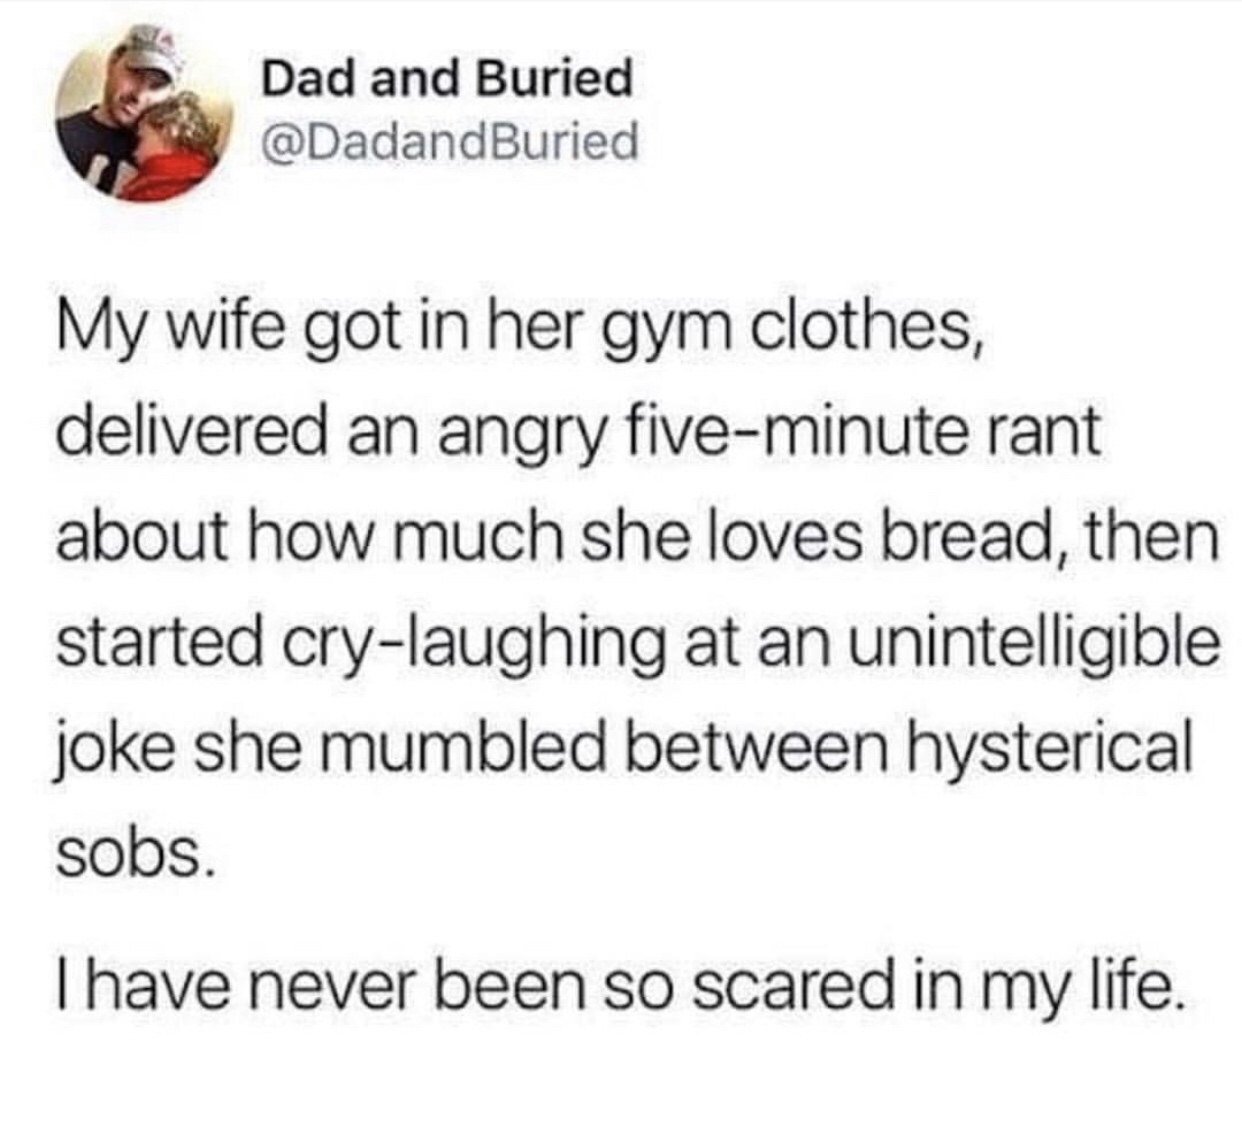 document - Dad and Buried My wife got in her gym clothes, delivered an angry fiveminute rant about how much she loves bread, then started crylaughing at an unintelligible joke she mumbled between hysterical sobs. Thave never been so scared in my life.